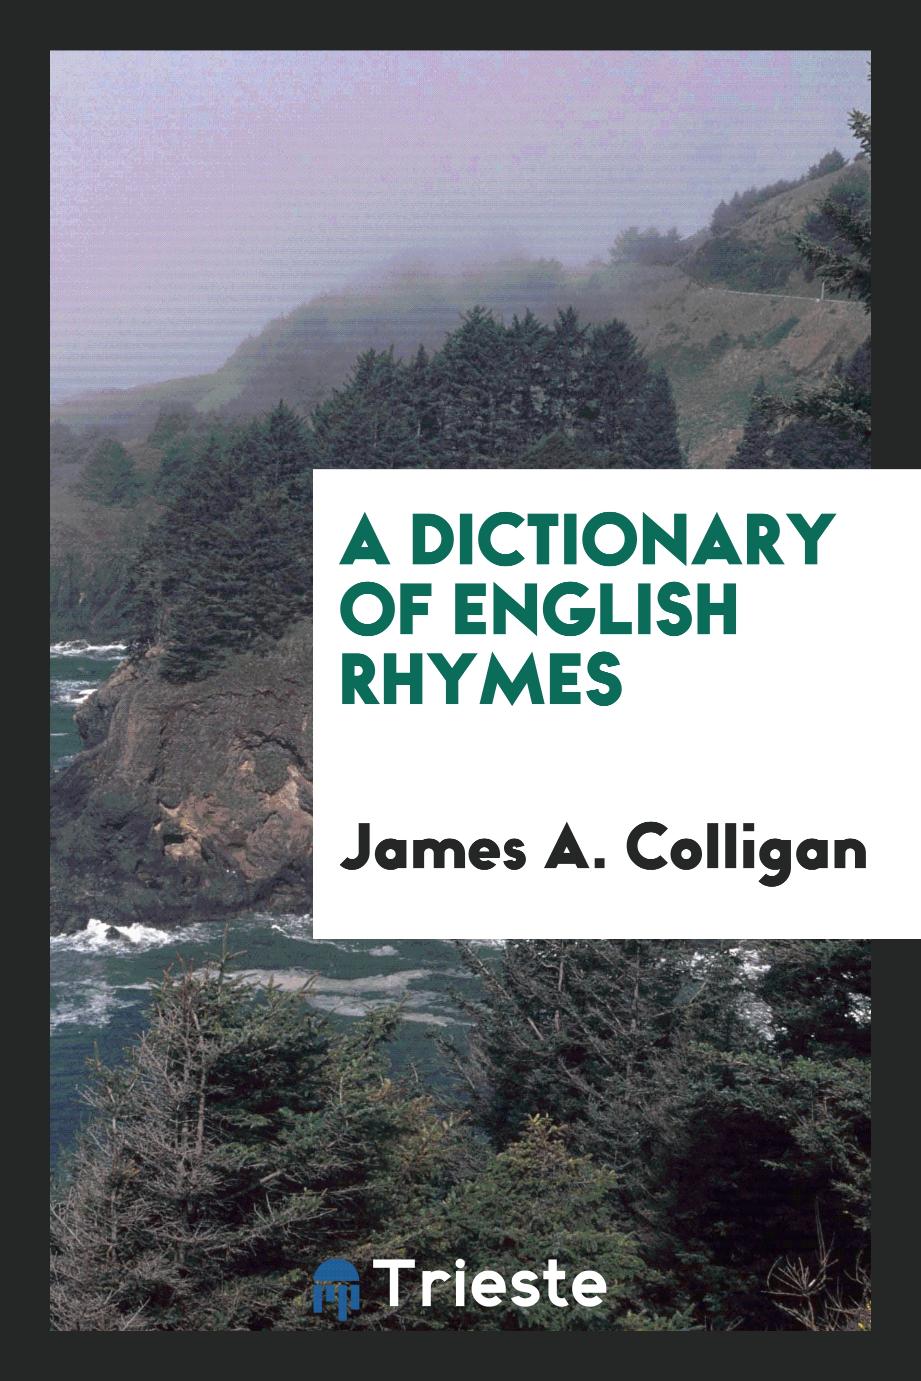 A Dictionary of English Rhymes